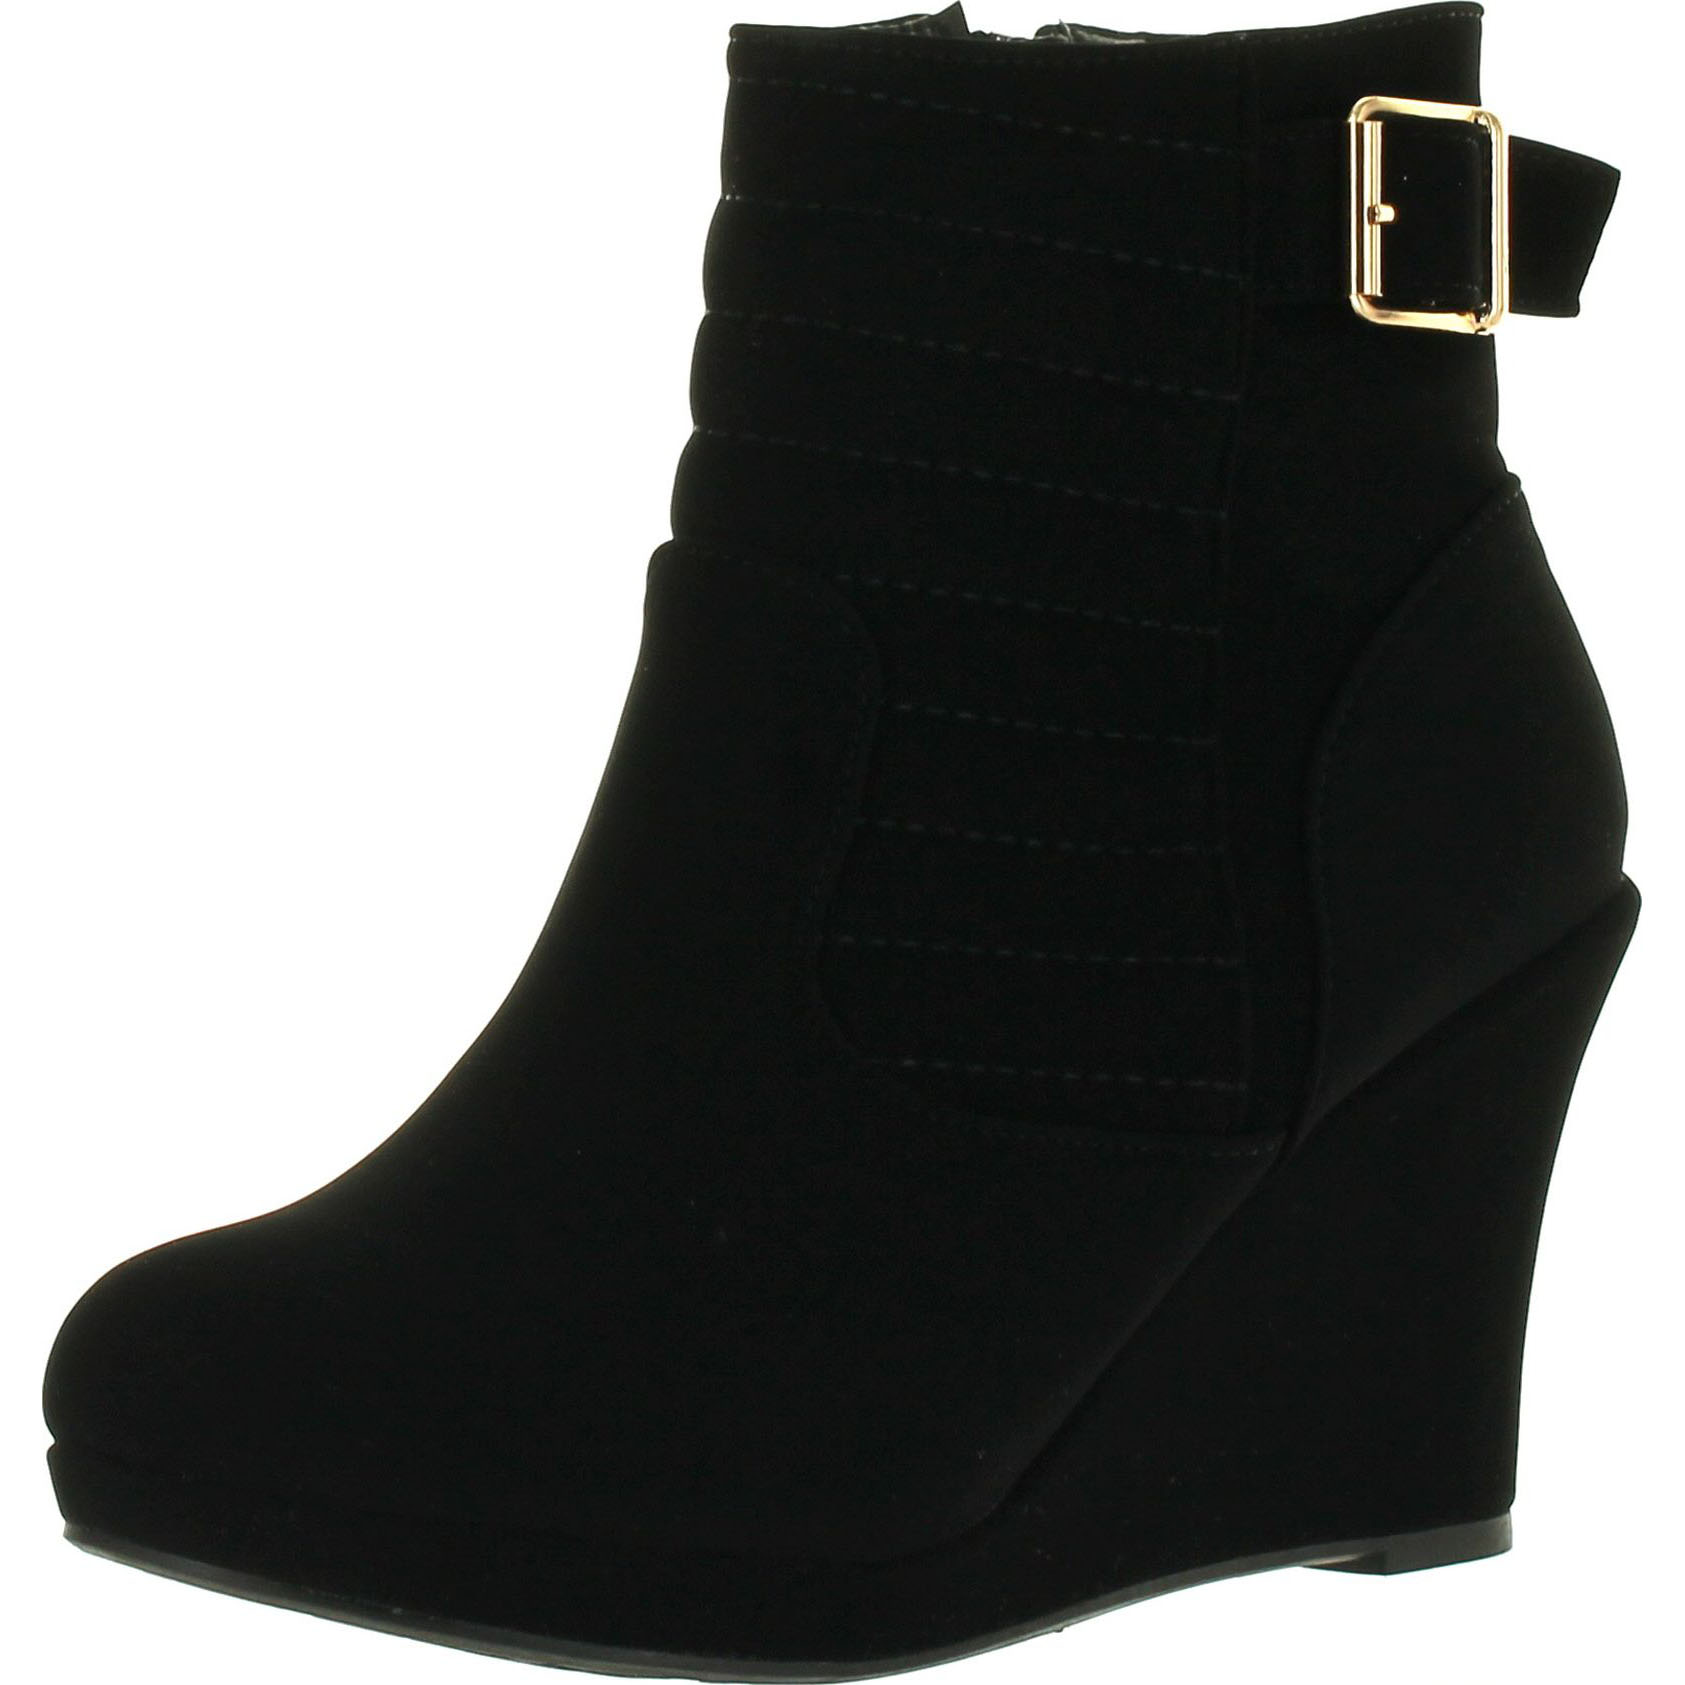 Top Moda Cotton 16 Womens Buckle Wedge Ankle Booties Black